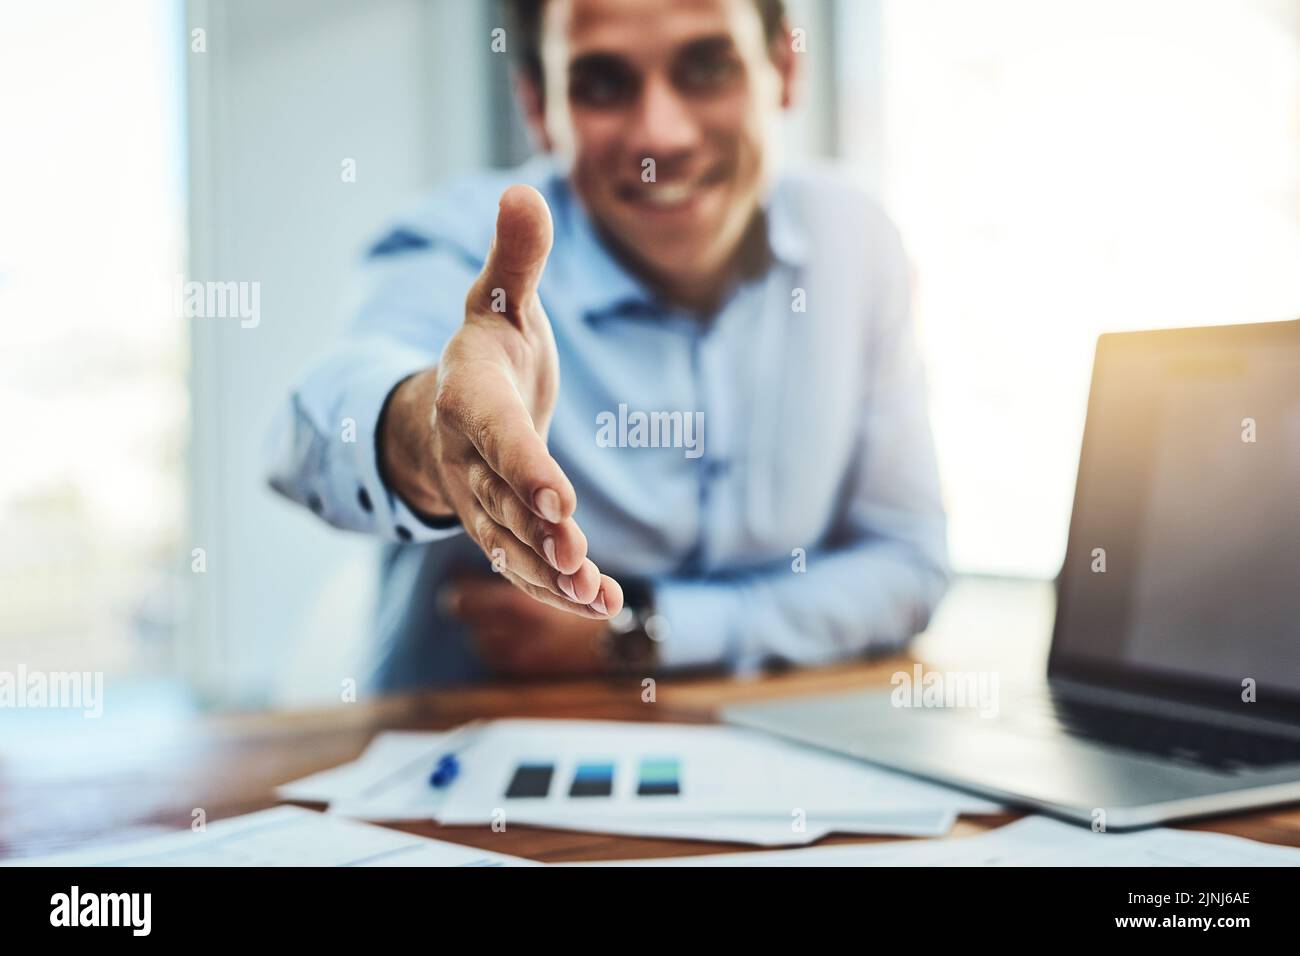 Handshake, deal and hiring HR manager extending his hand to negotiate, introduce or welcome candidate or sponsor. Data analyst, businessman or boss Stock Photo